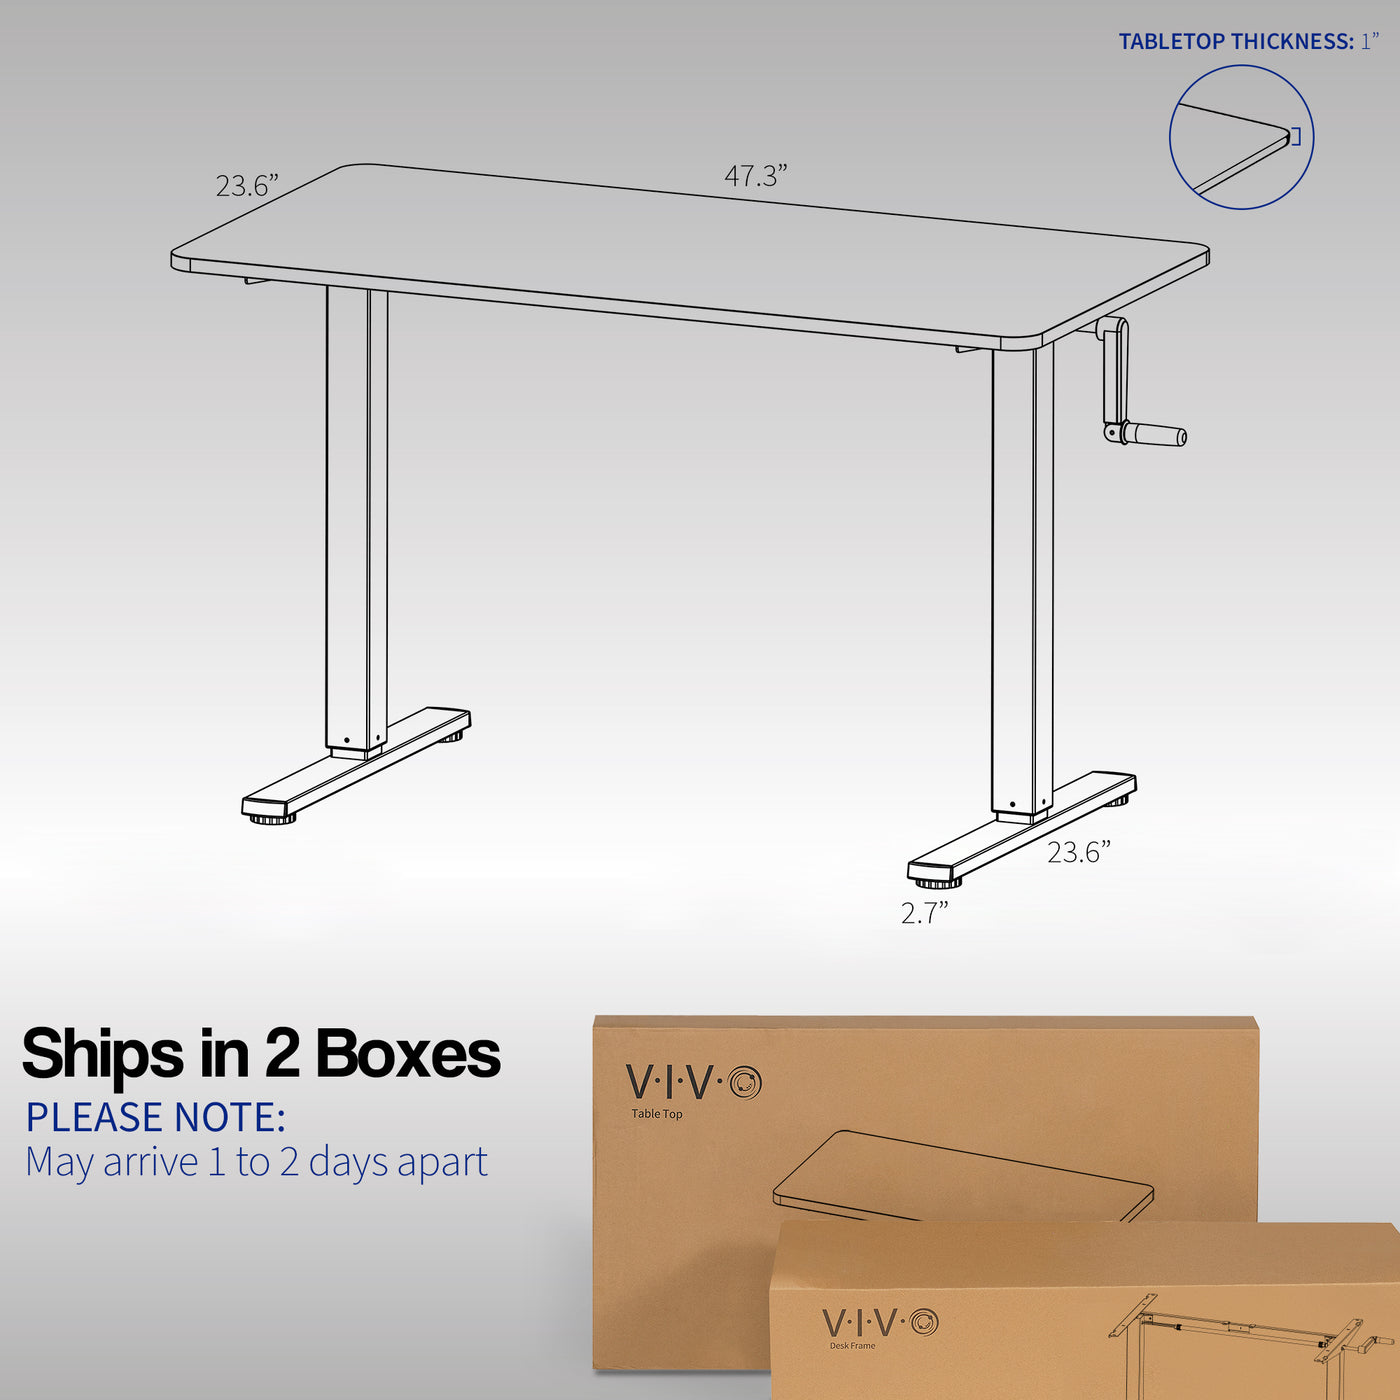 Please note that the desk ships in two boxes and may arrive on separate days.